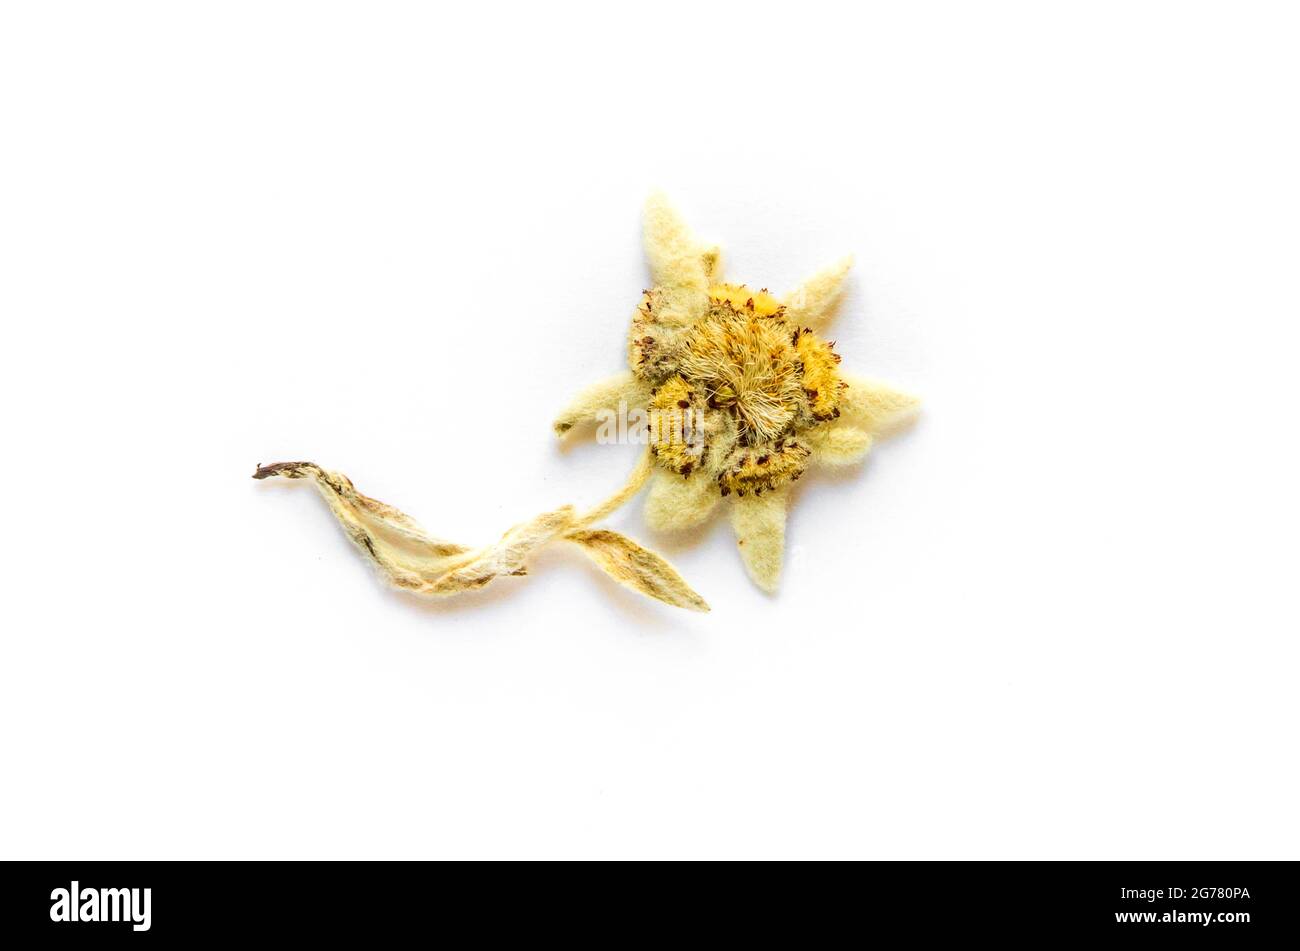 Dried Edelweiss flower isolated on white background. Stock Photo